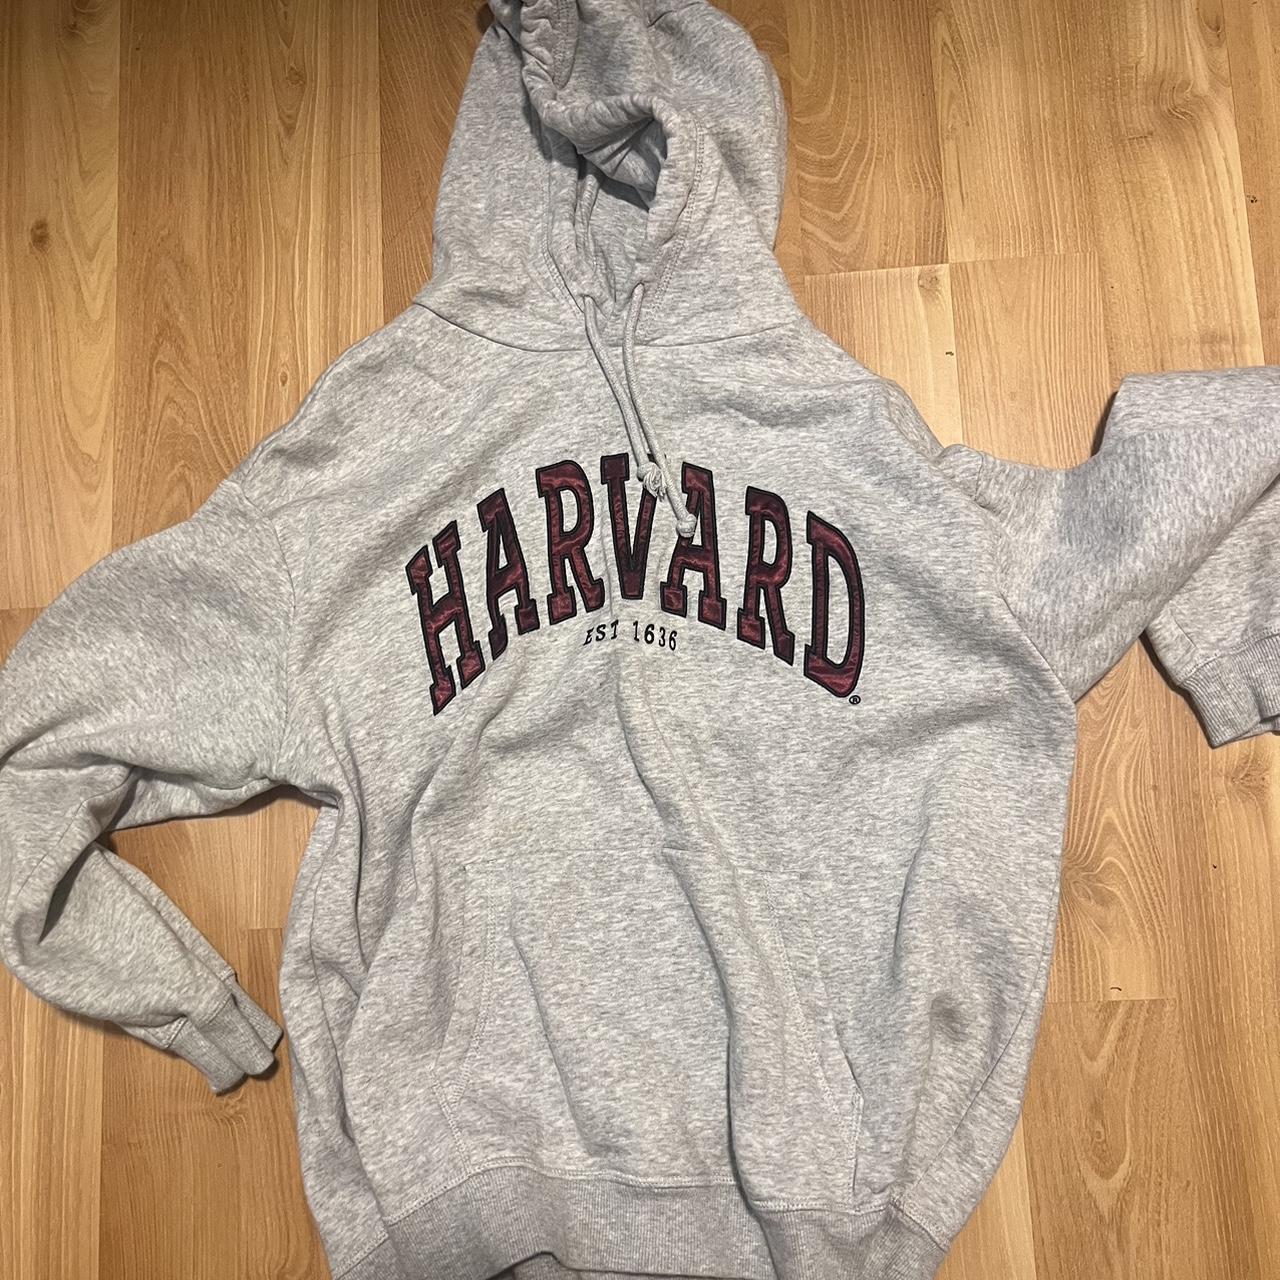 Grey oversized Harvard hoodie from H&M… super comfy.